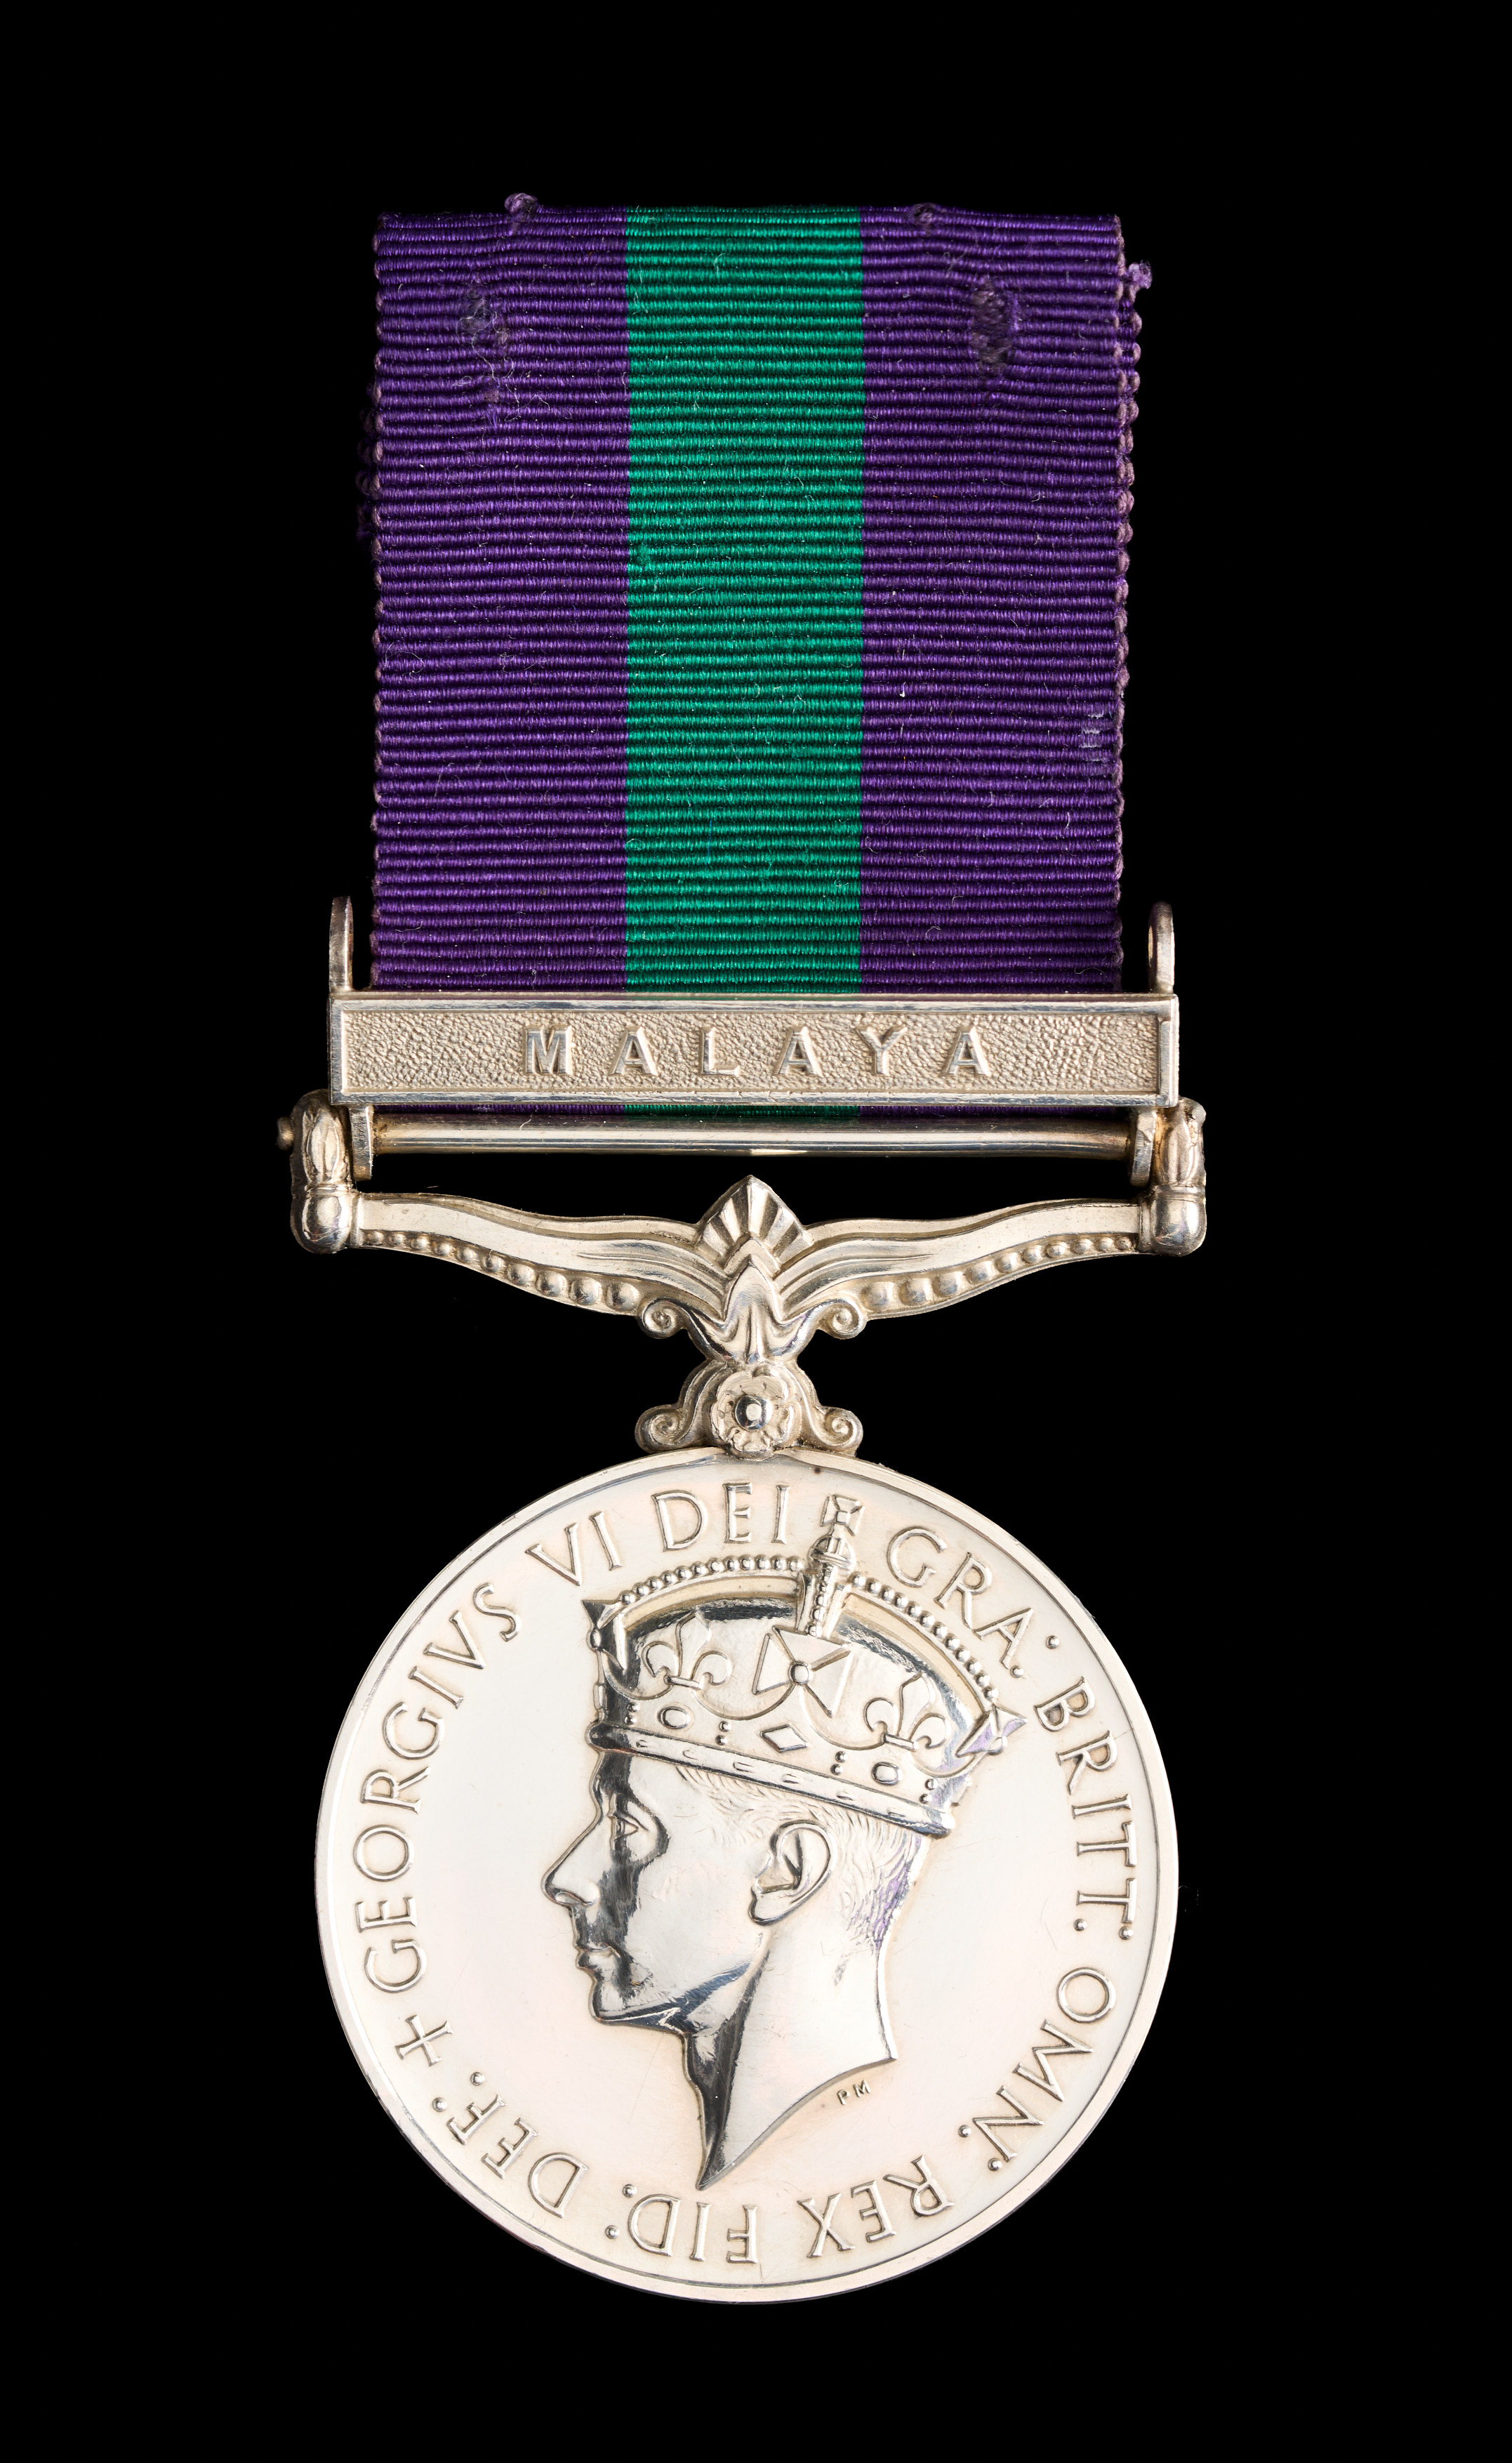 Robert G Ridgway : General Service Medal with ‘Malaya’ clasp